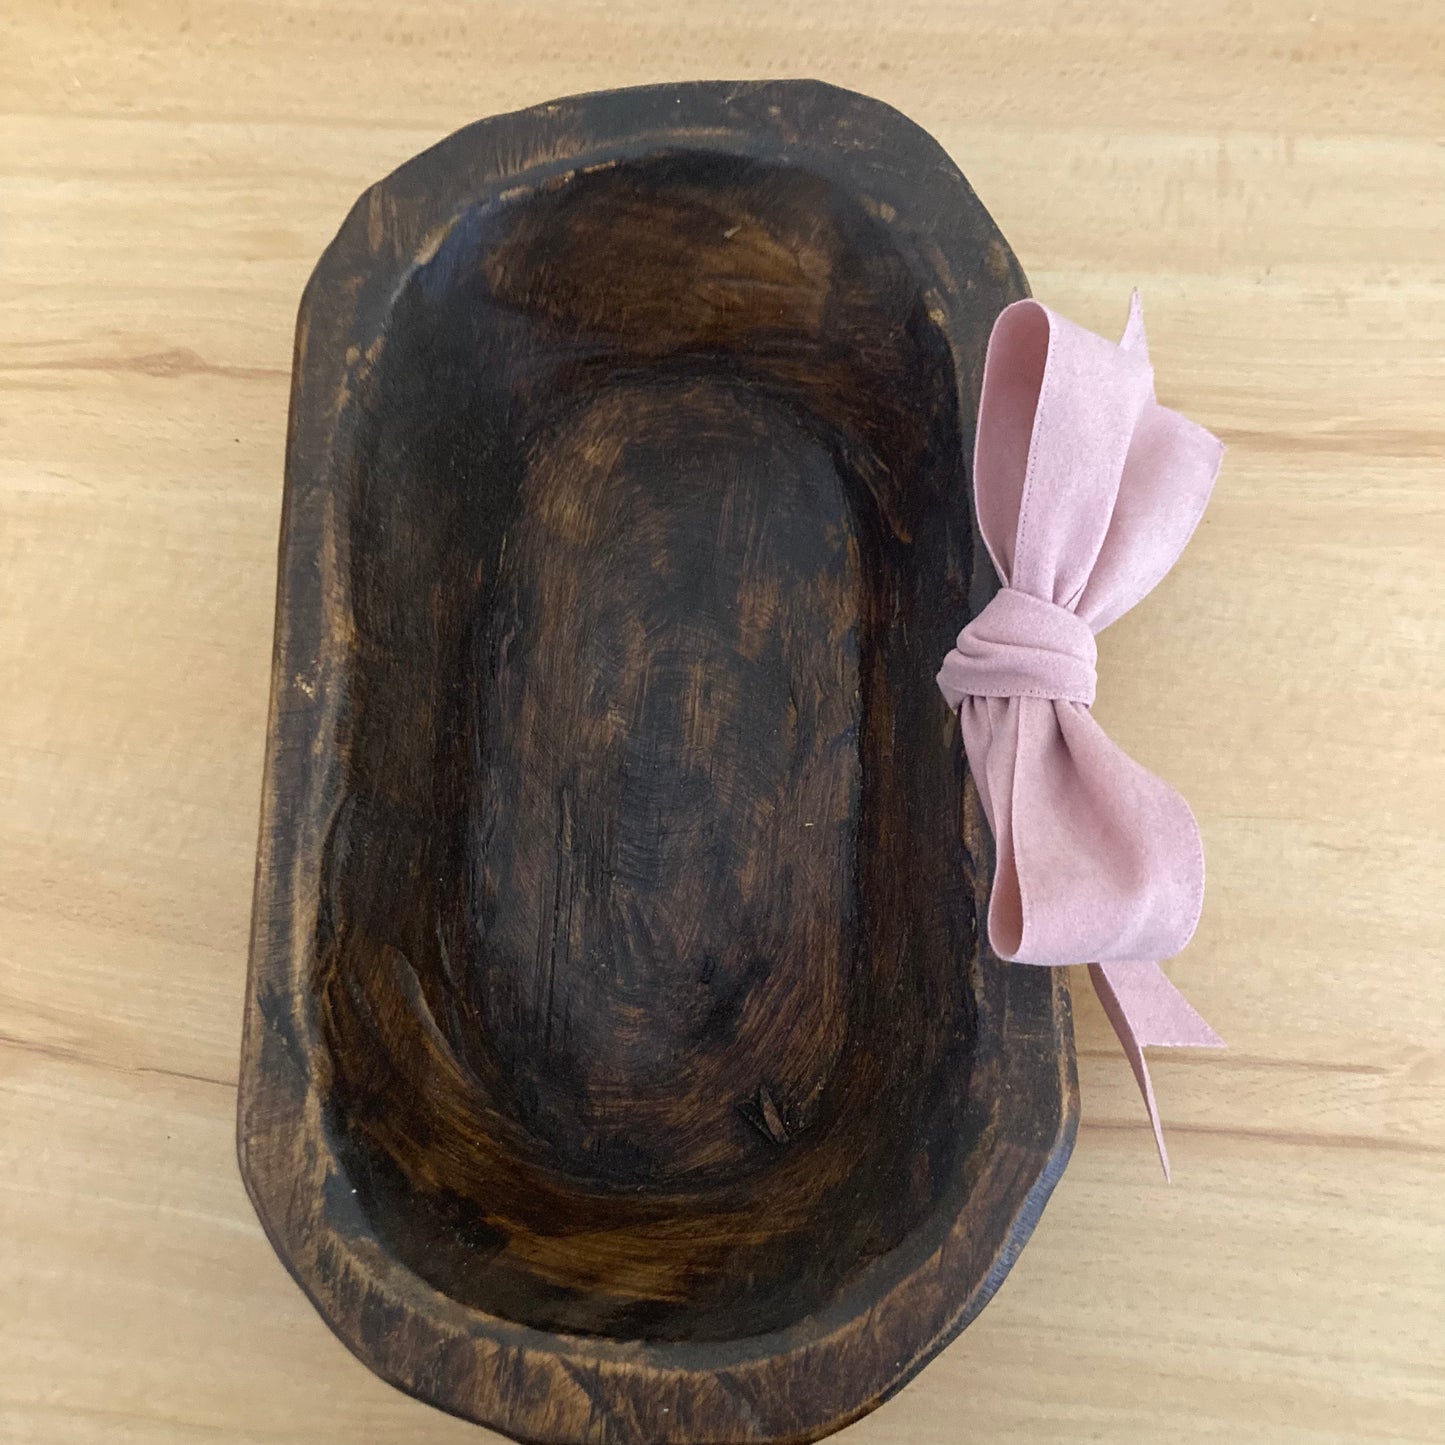 Dough Bowl with Bow (Pink or Beige)